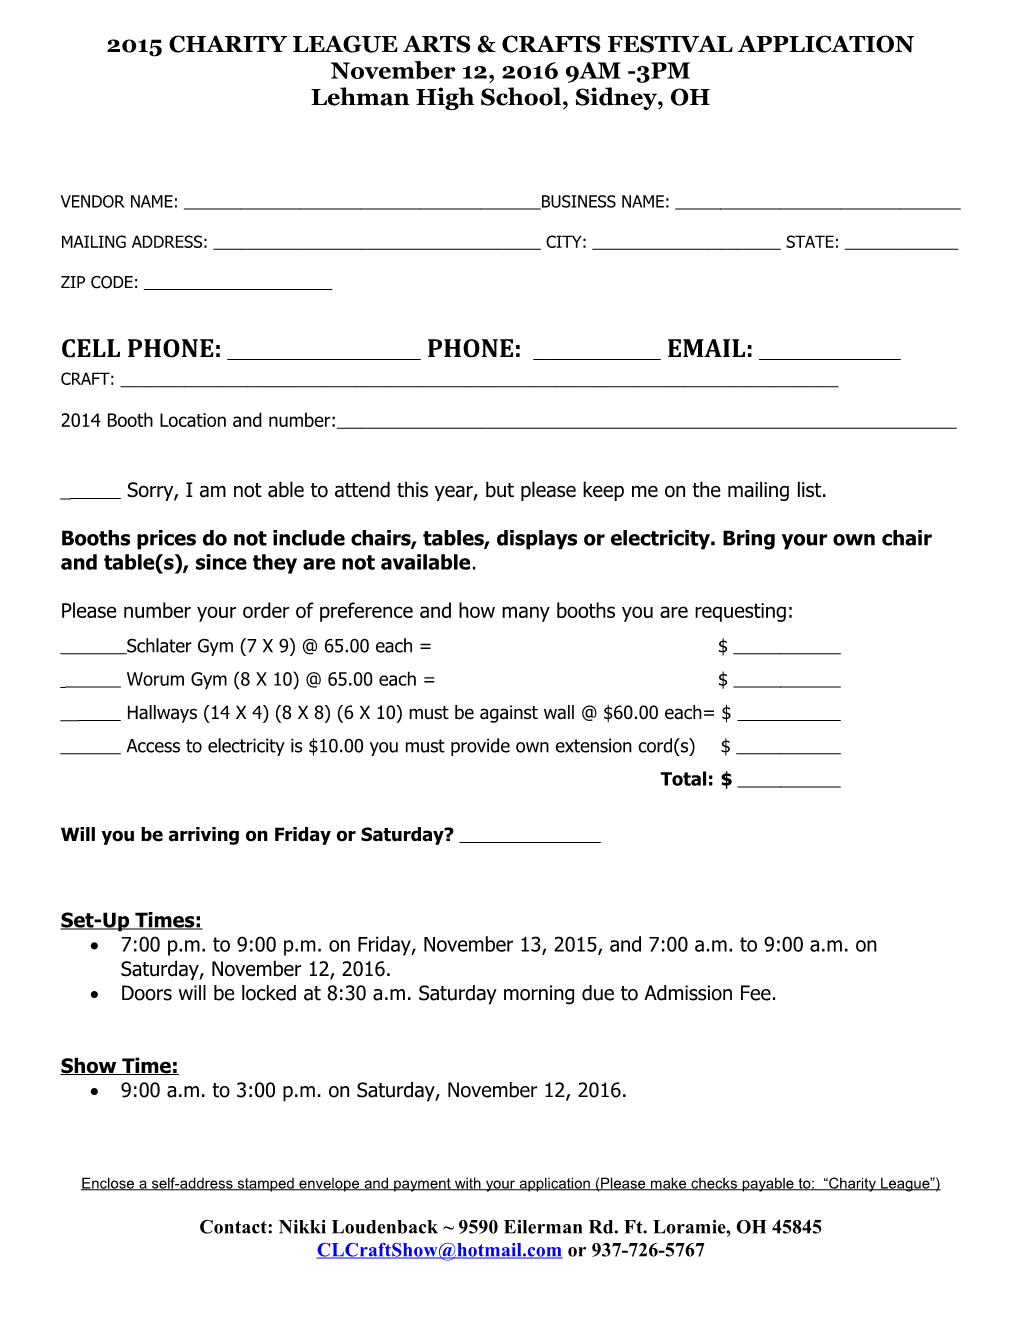 2015 Charity League Arts & Crafts Festival Application